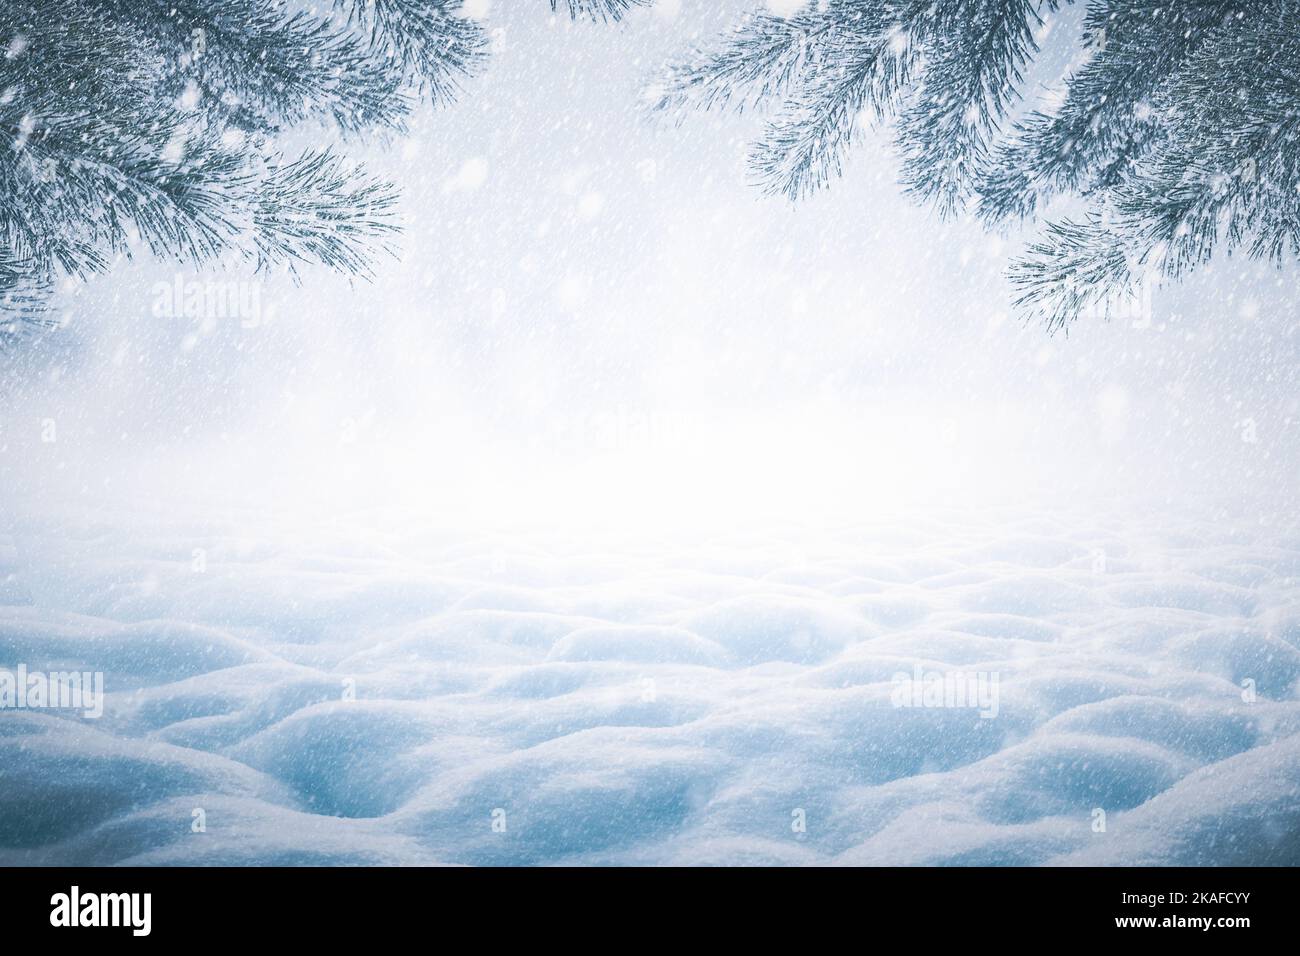 Winter Christmas background with snowy pine branches and snow heap Stock Photo